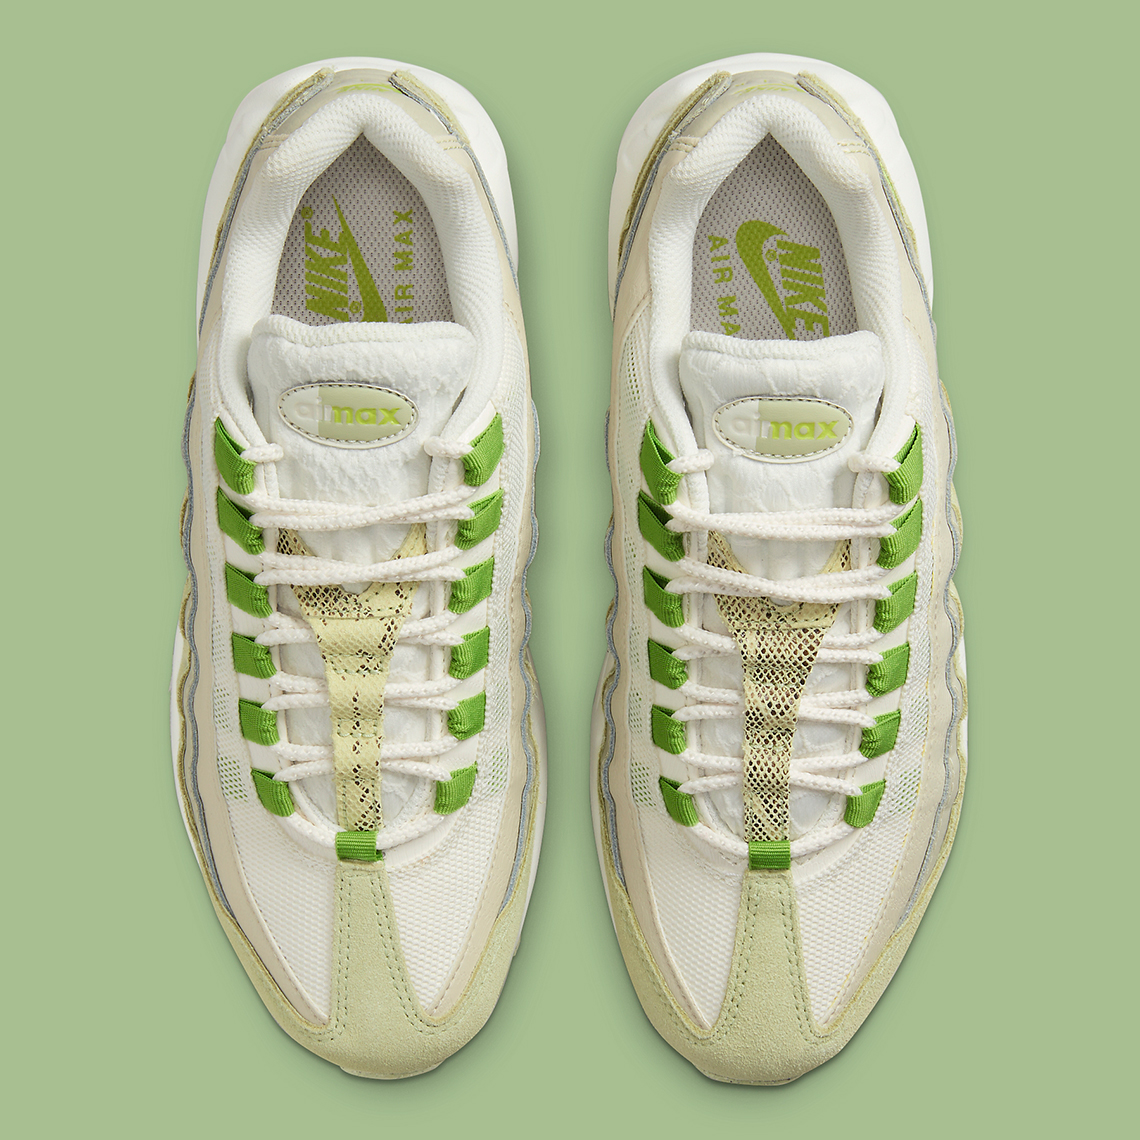 nike air max 95 green snake 2022 release date 3